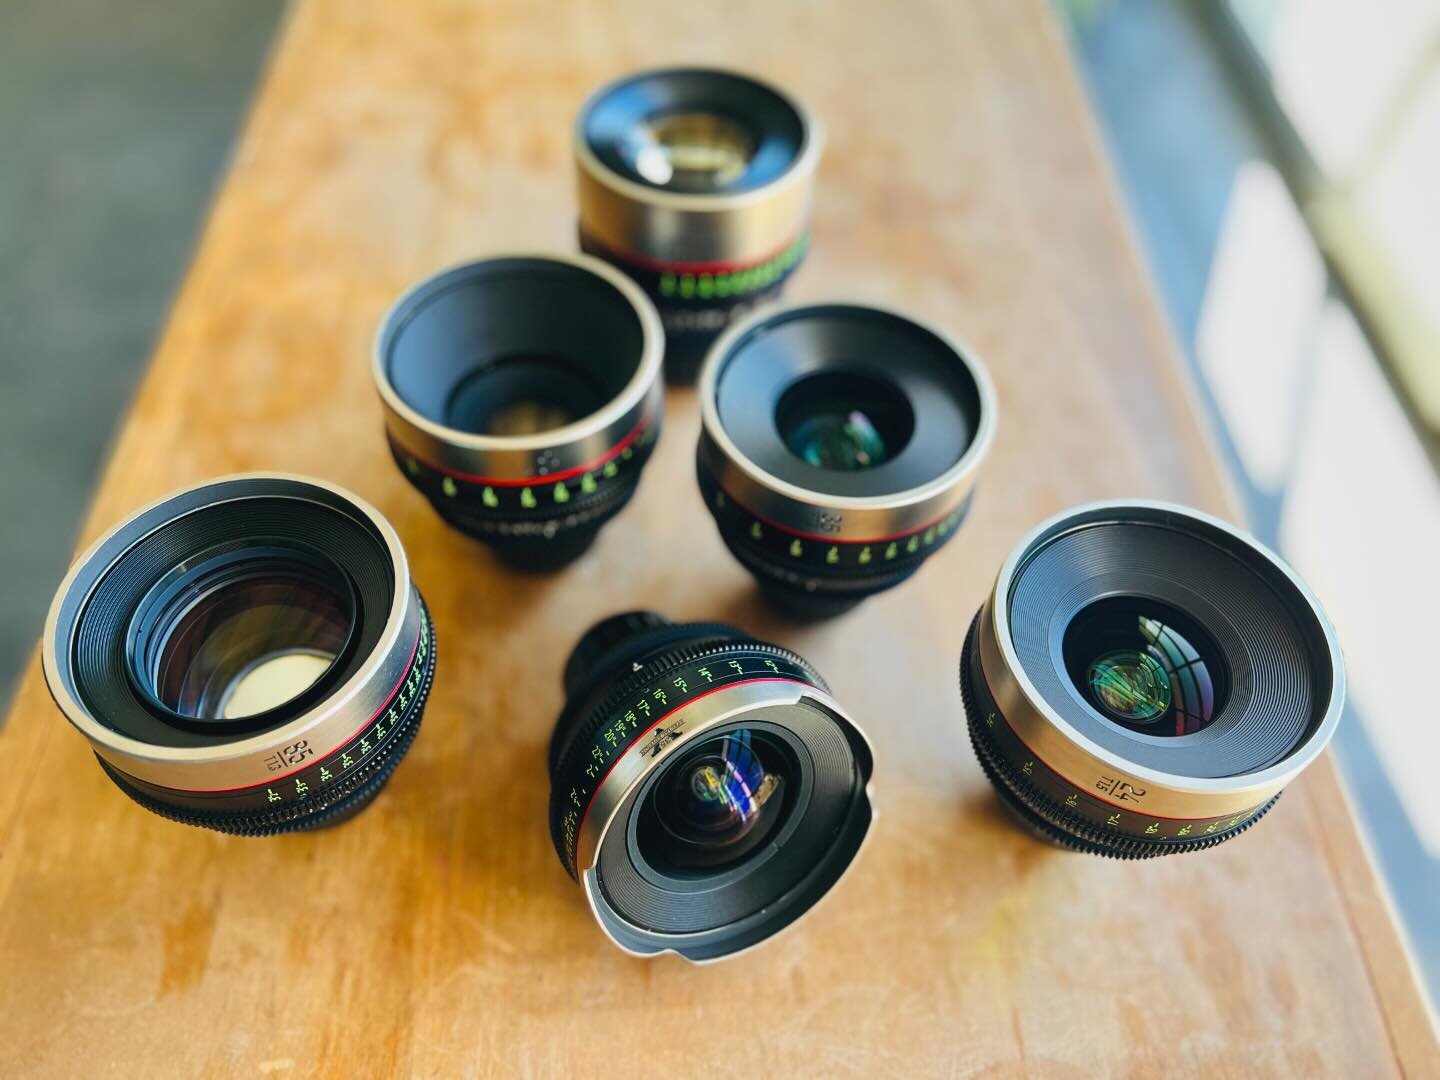 Canon V35 6 lens kit is avail for rental! These lenses were originally Canon CN-E primes in EF mounts. They&rsquo;ve been converted to PL with some coating mods by Duclos (by way of Northwest Camera Co). The idea is to make them more K35-like, which 